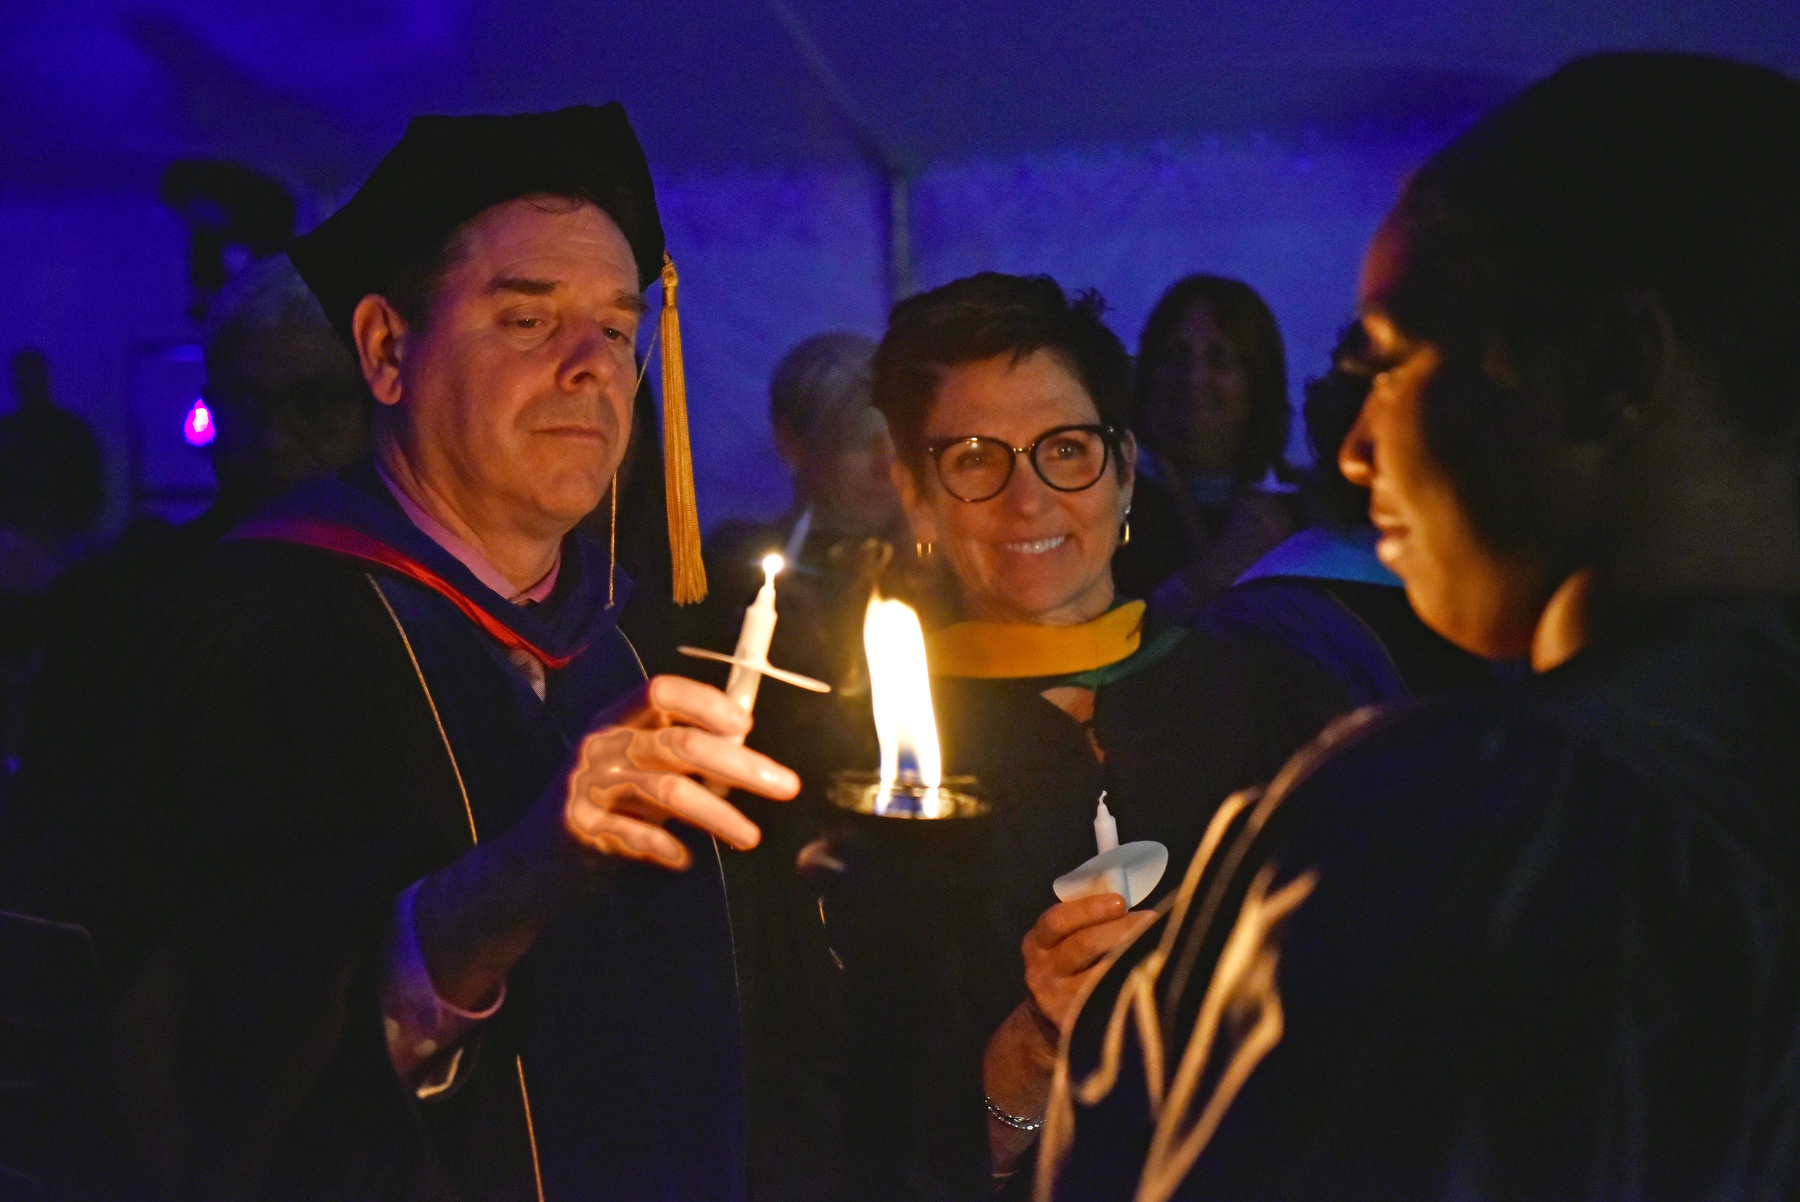 Torchbearer Danielle Boxill '23 lights the candles held by Provost Scott Furlong and Vice President of University Advancement Mary Gibbons Canale '81.